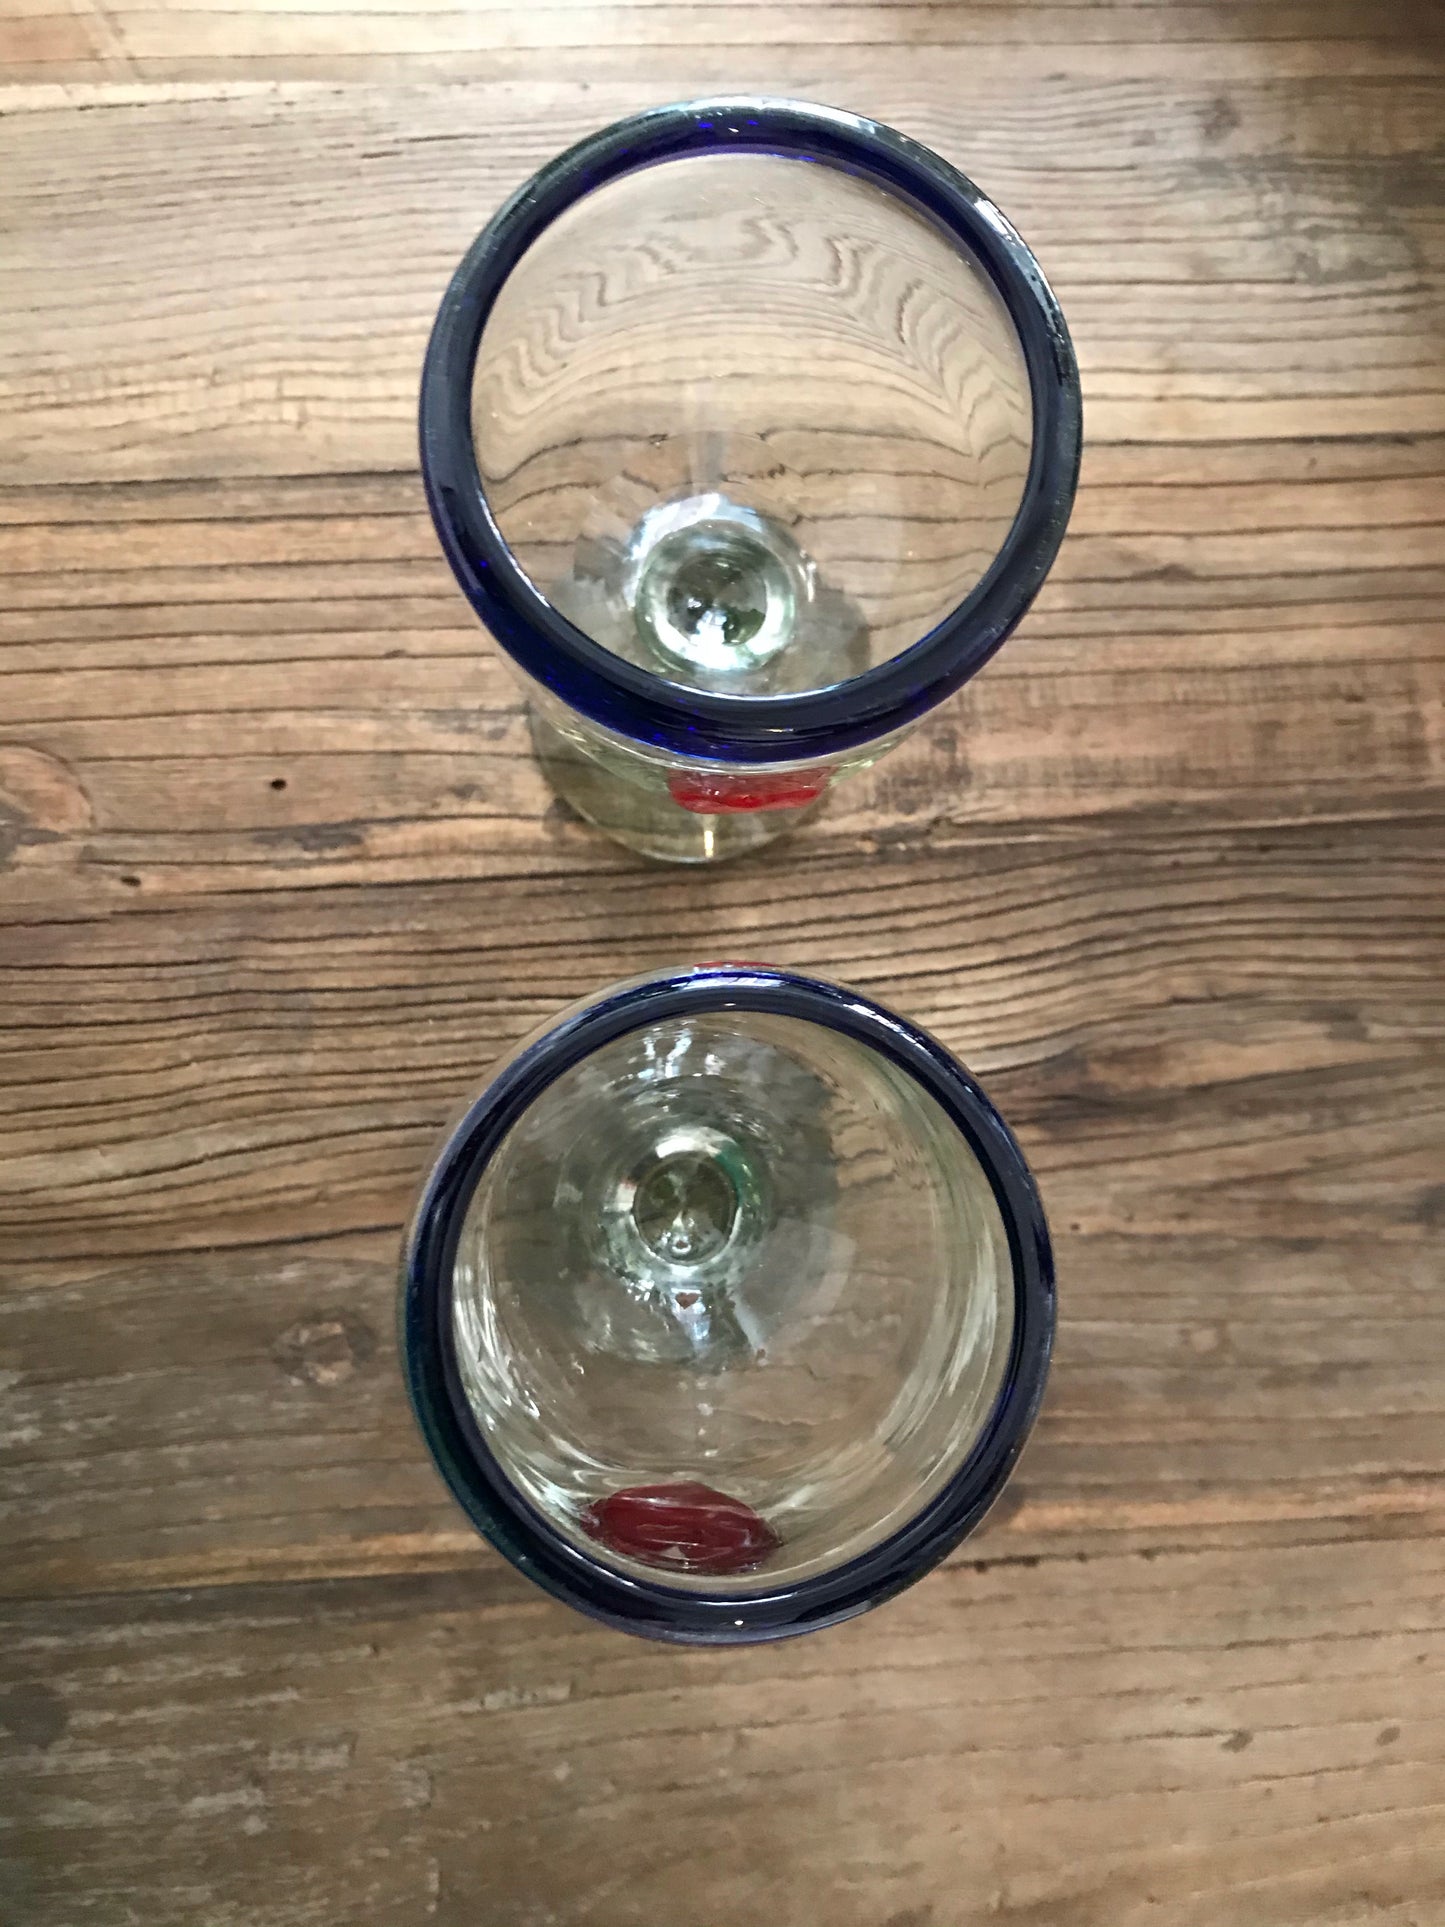 Vintage Set Of Mexican Artisanal Glasses